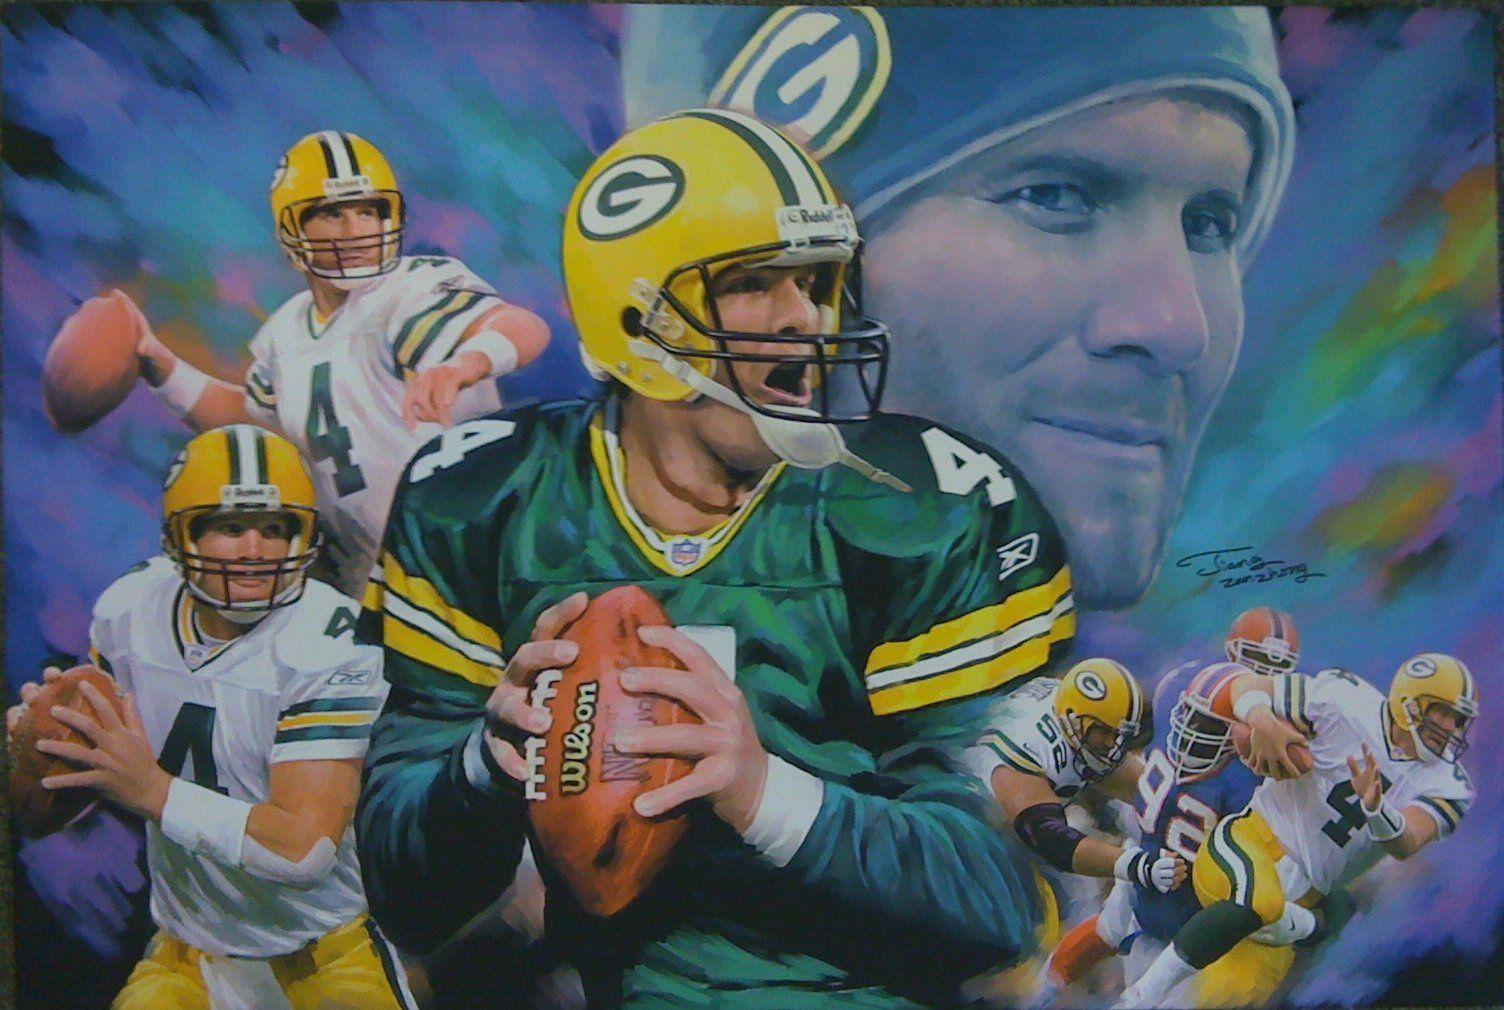 Brett Favre uses a GREAT story as a reminder to never assume that